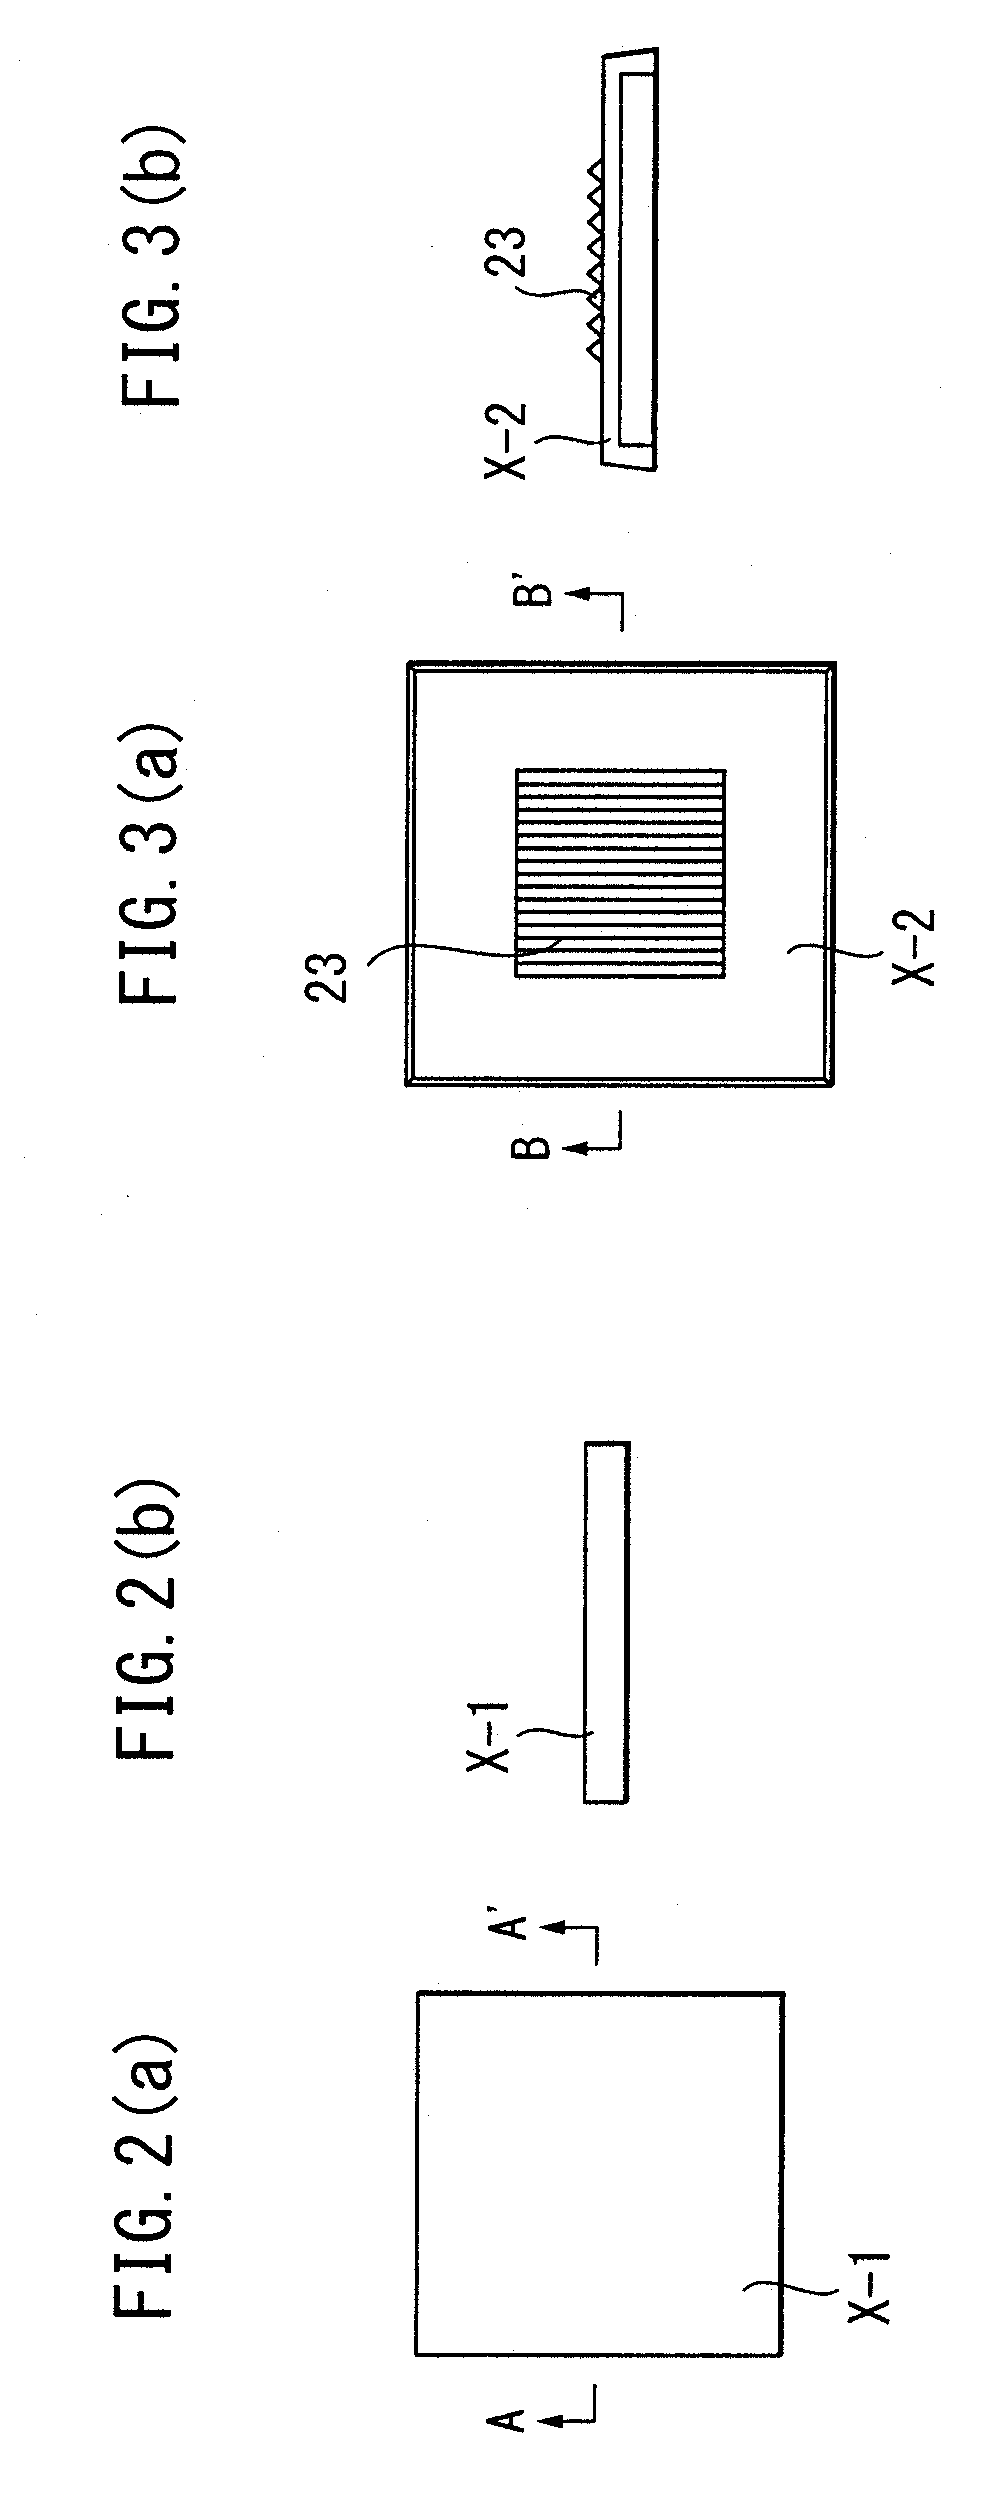 Method for molding thermoplastic resin